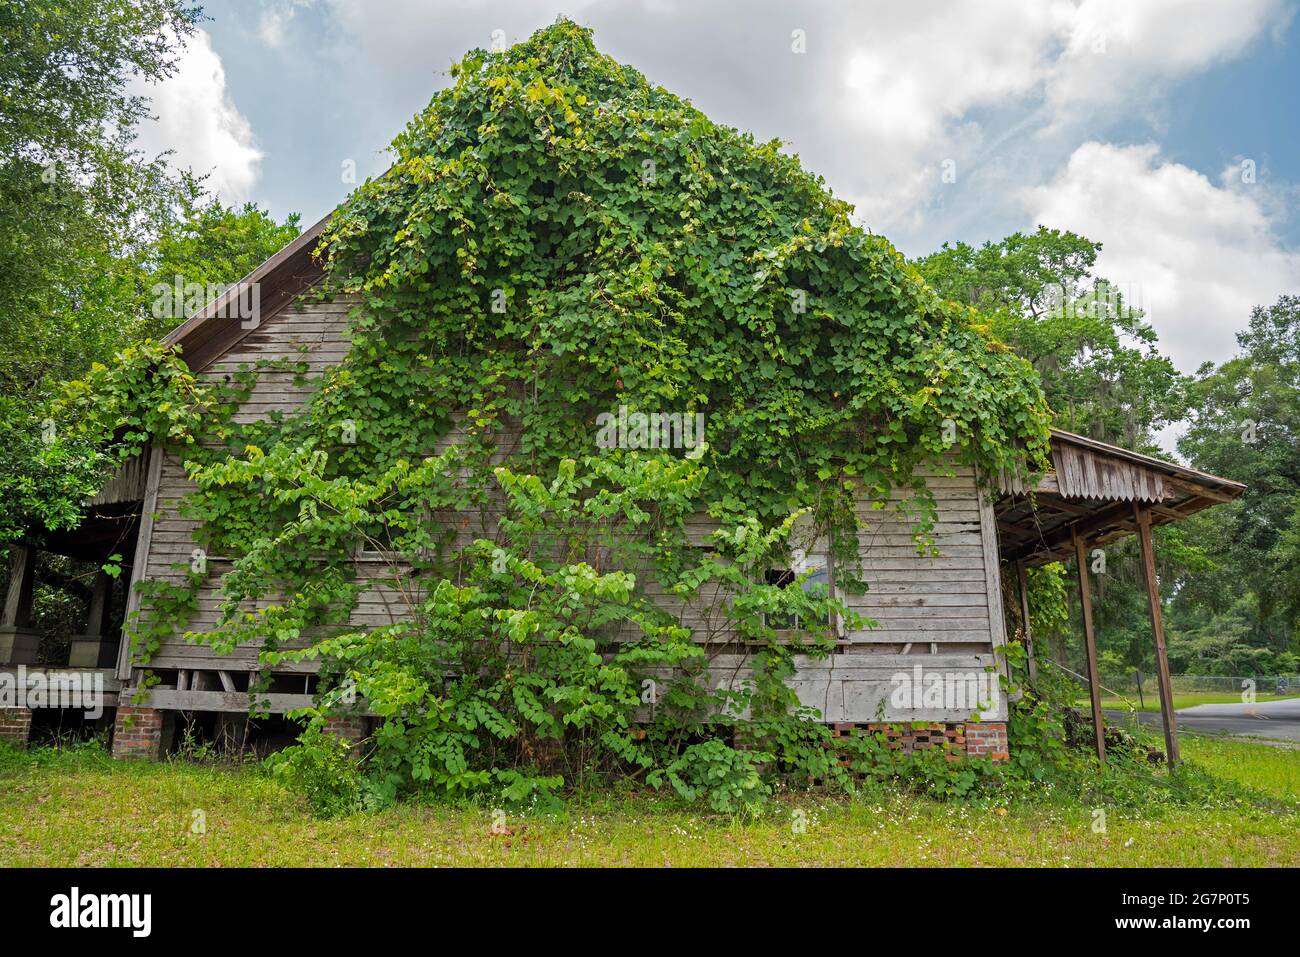 Vines engulf an old wooden frame home in Ft. White, Florida. Stock Photo